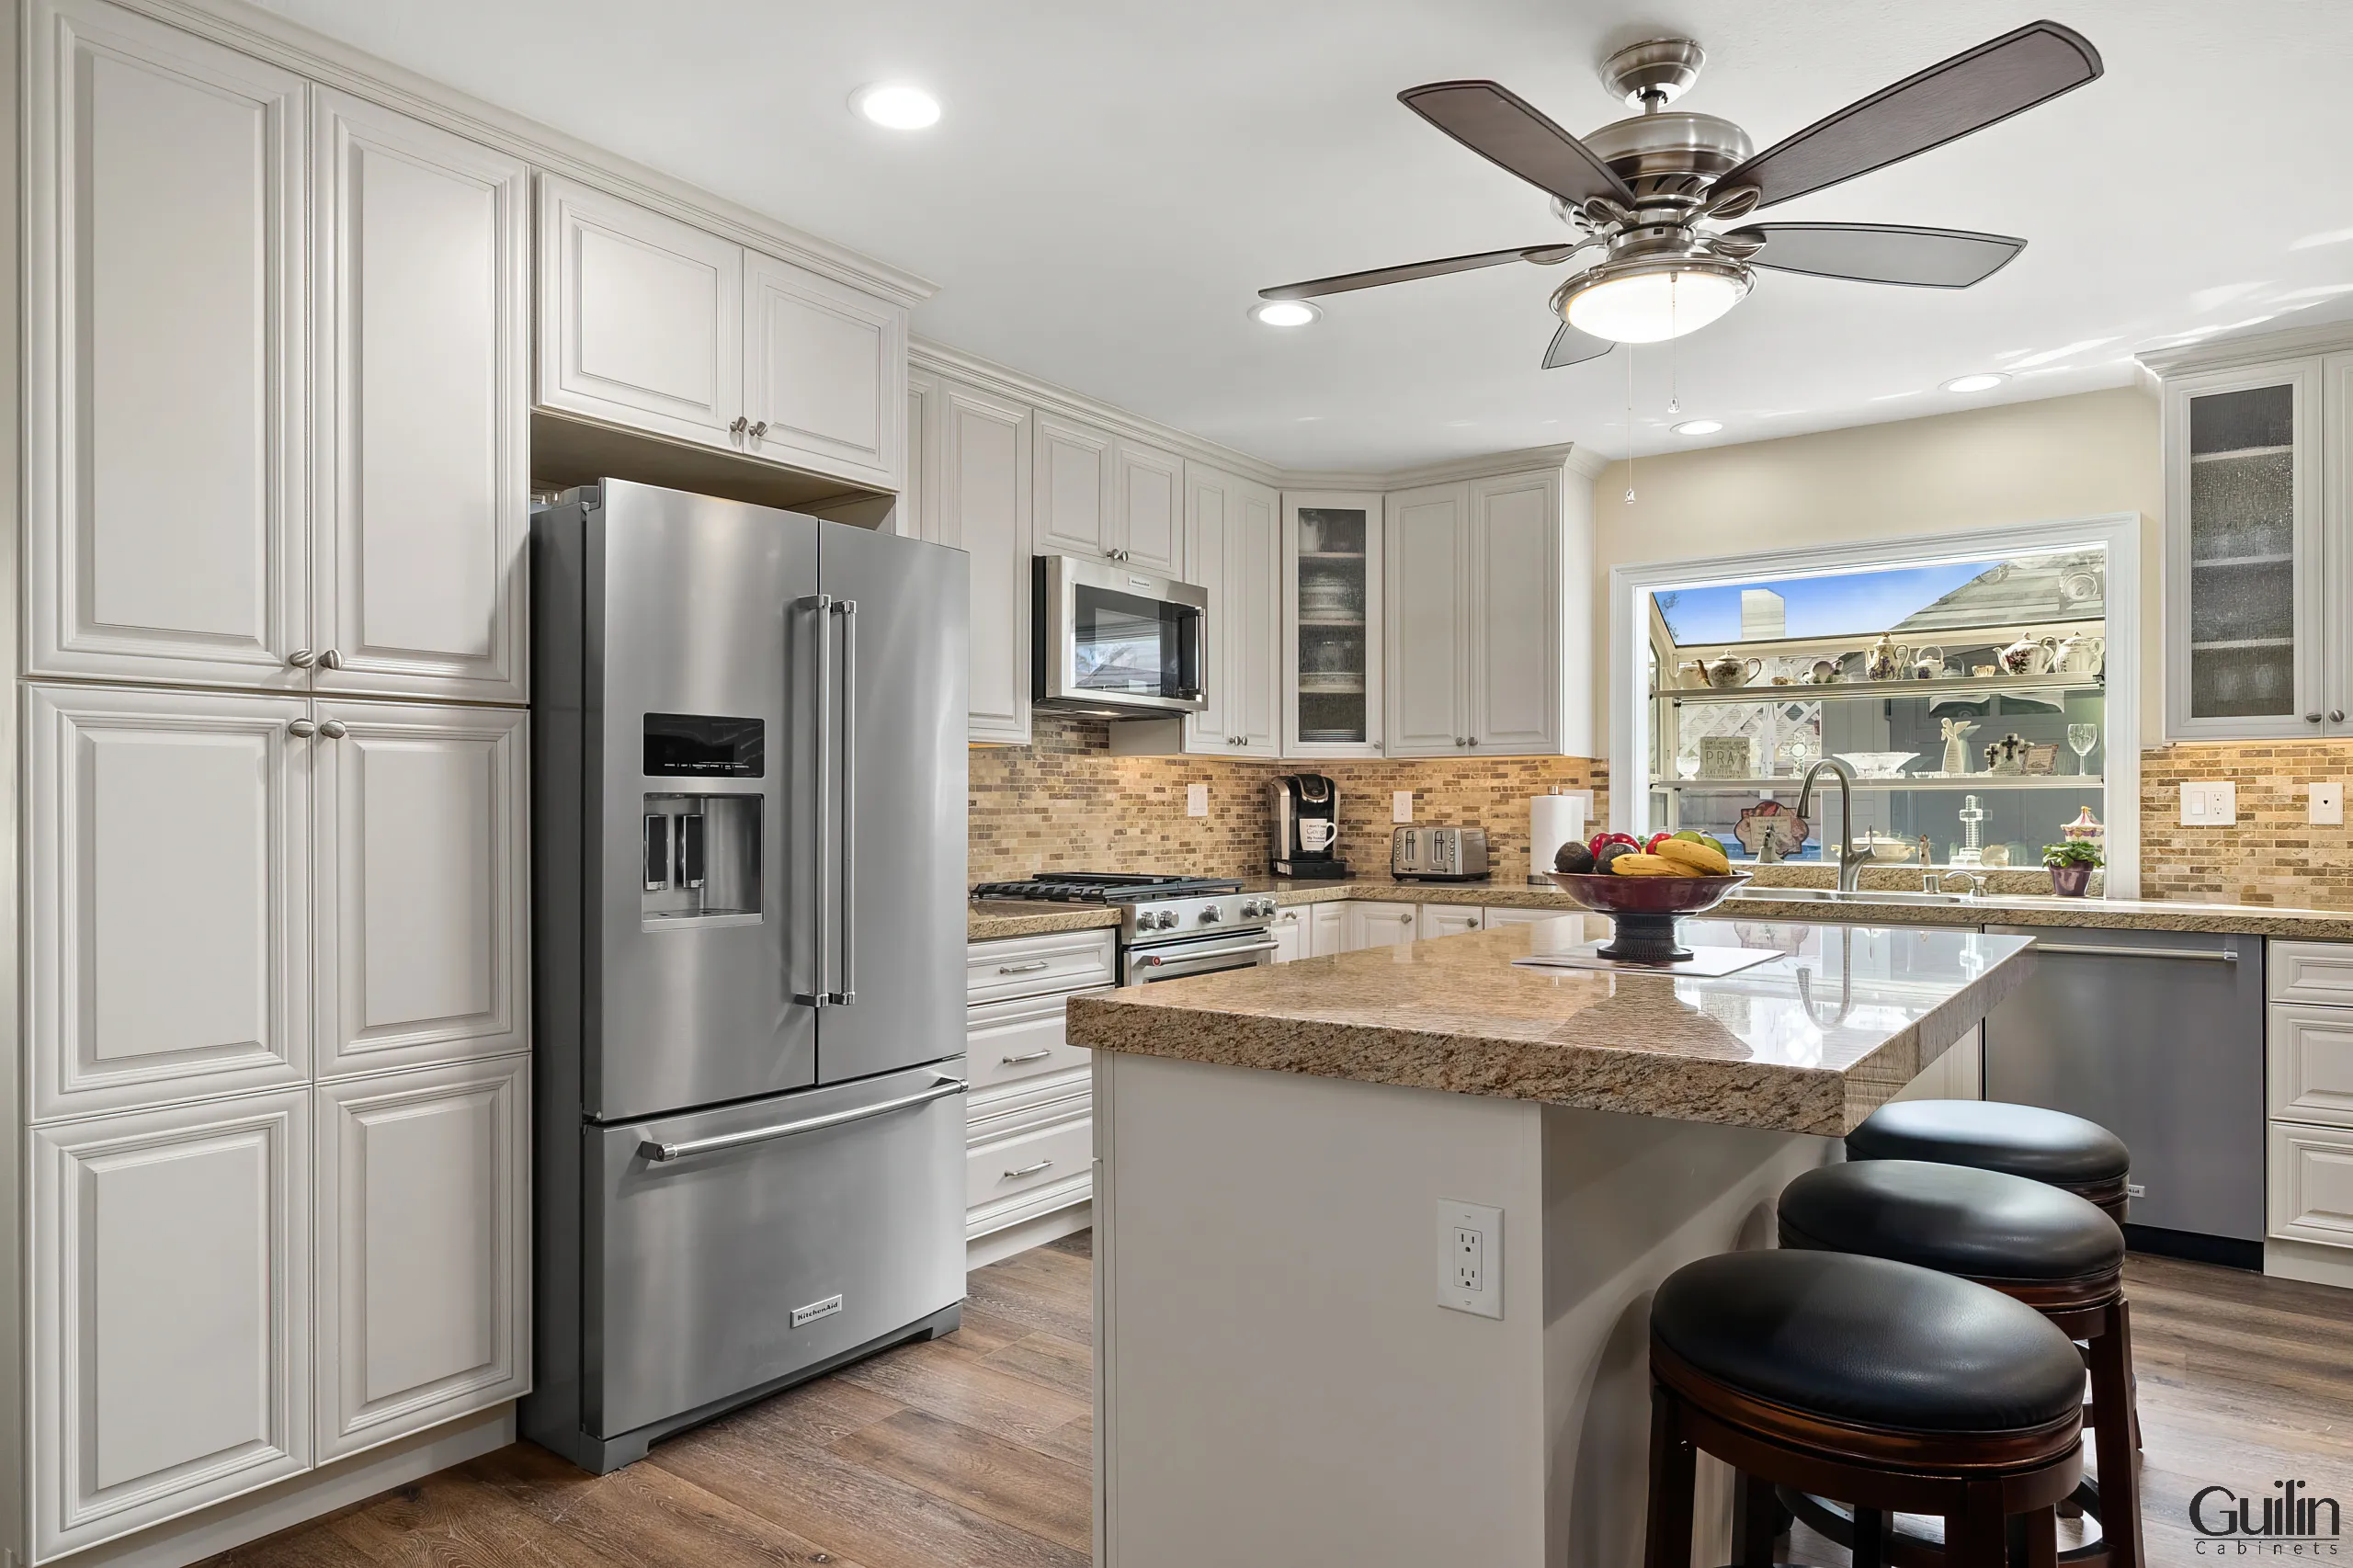 The beautiful granite countertop in a stately Yellow or black hue will not disappoint you.